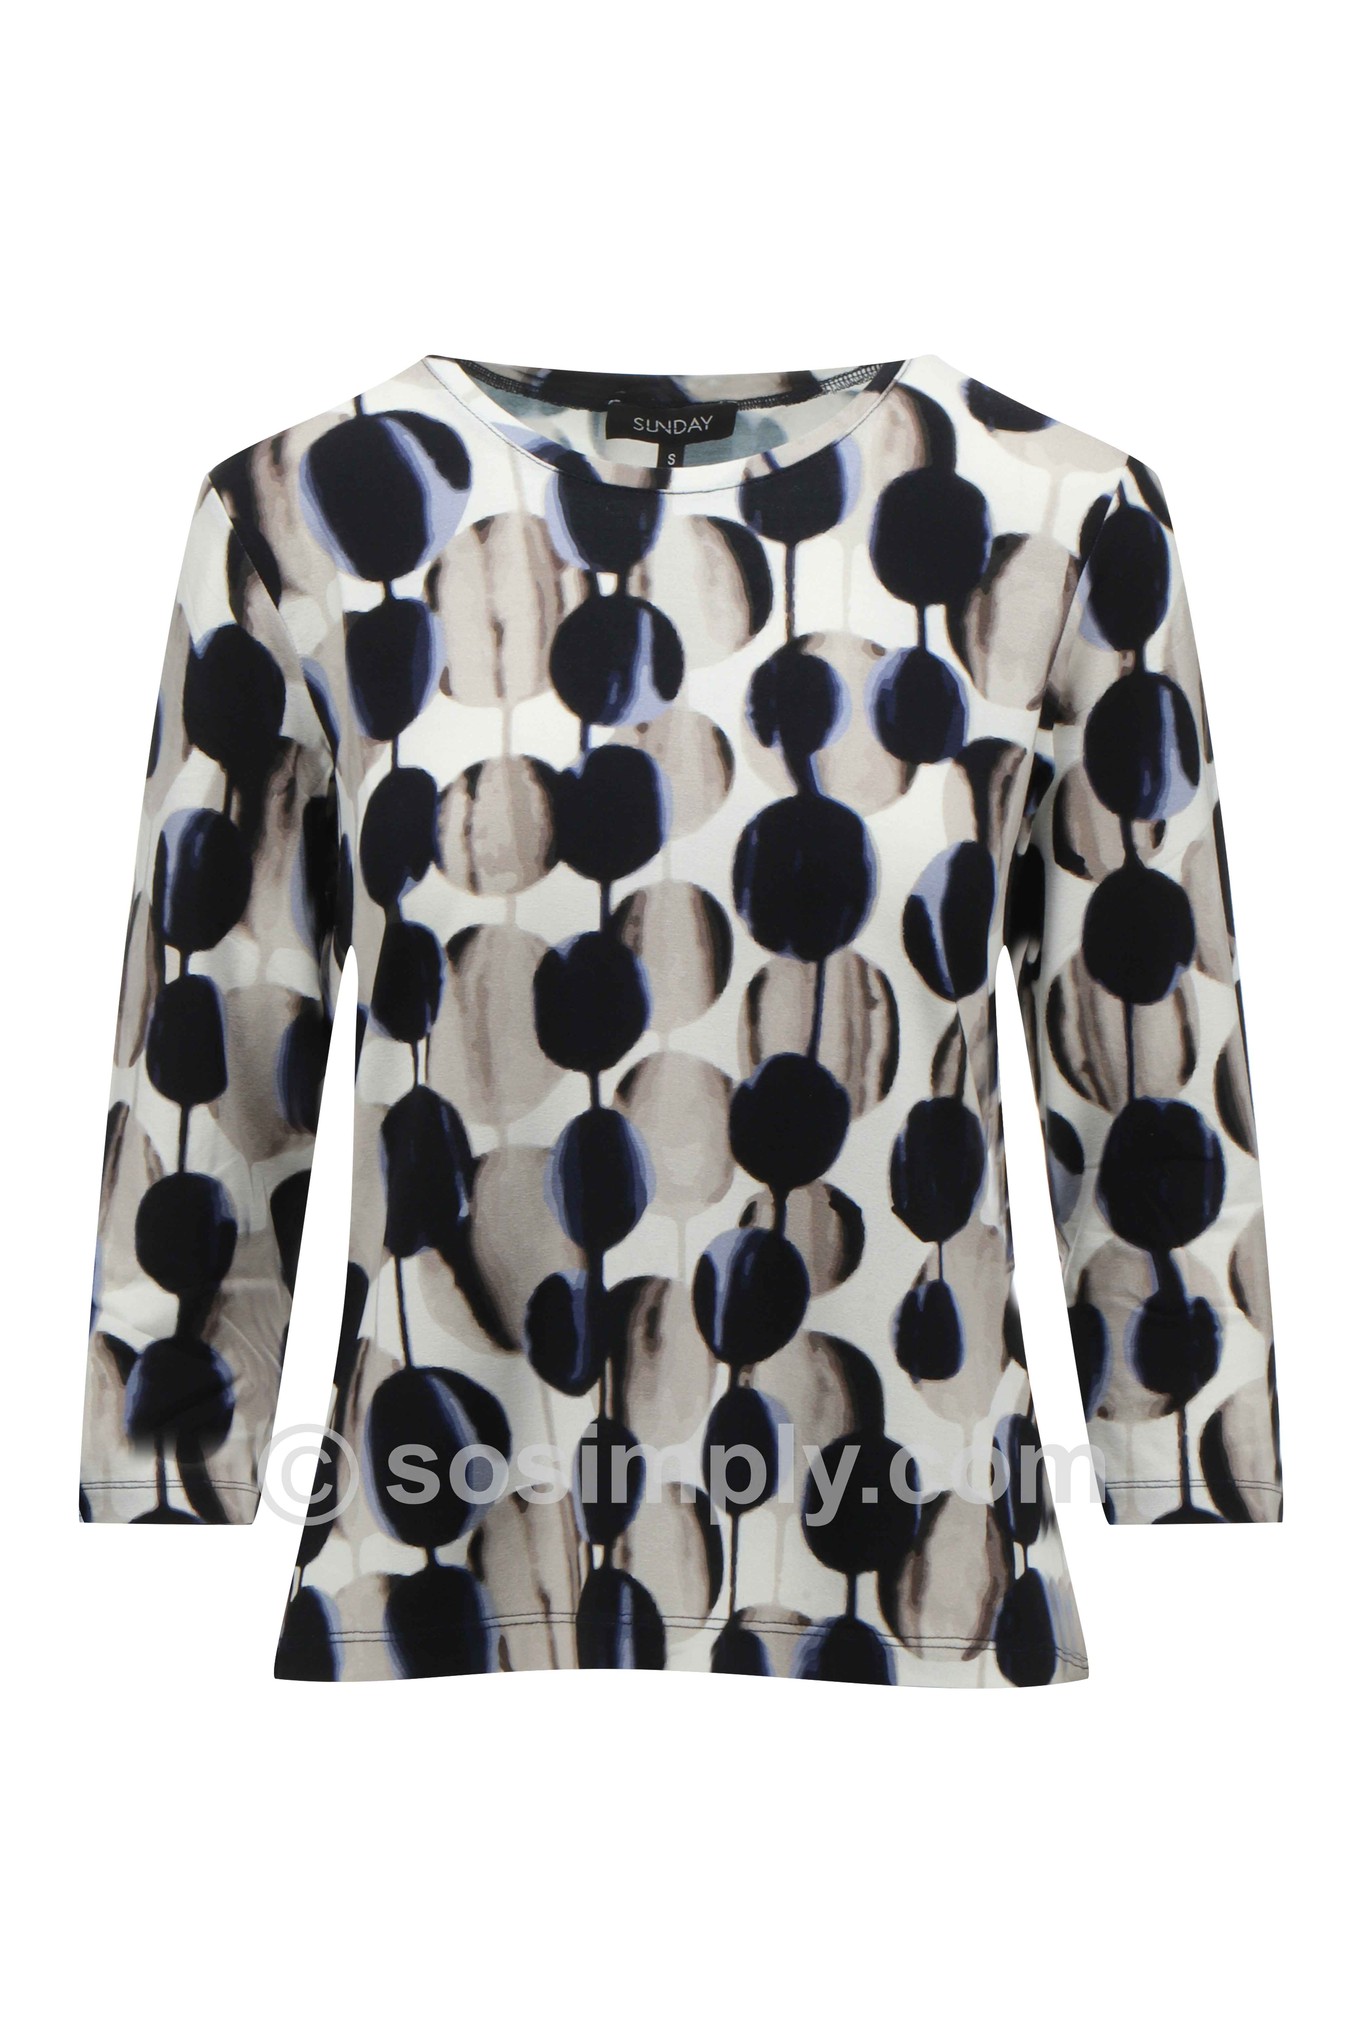 Sunday Danique Abstract Print Top